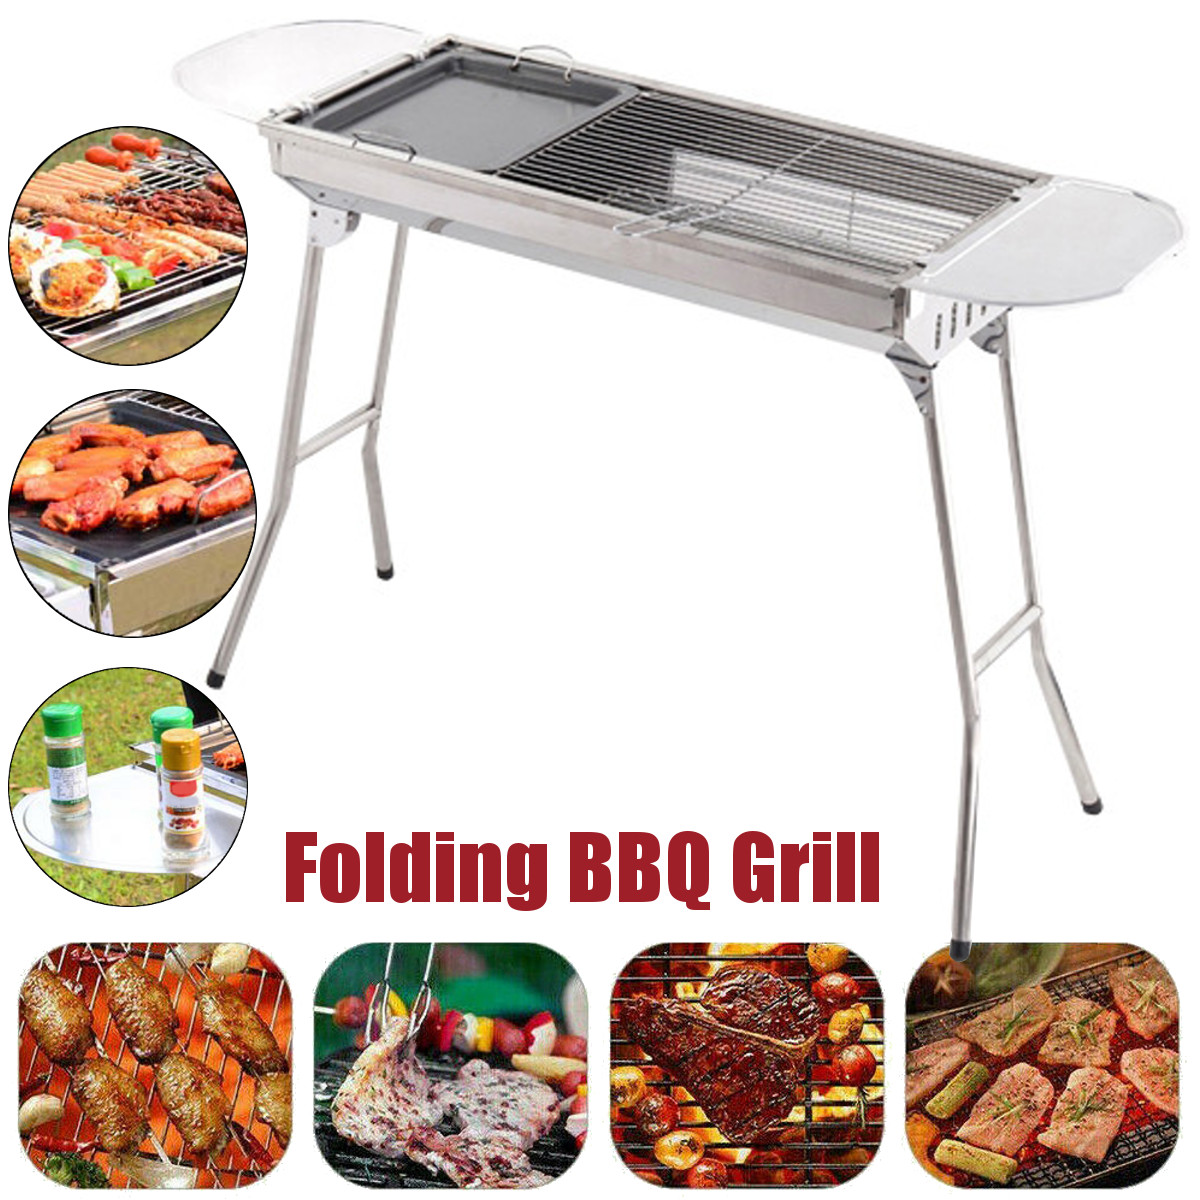 Portable-Folding-Charcoal-BBQ-Barbecue-Grill-Travel-Picnic-Camping-Outdoor-Stove-1701655